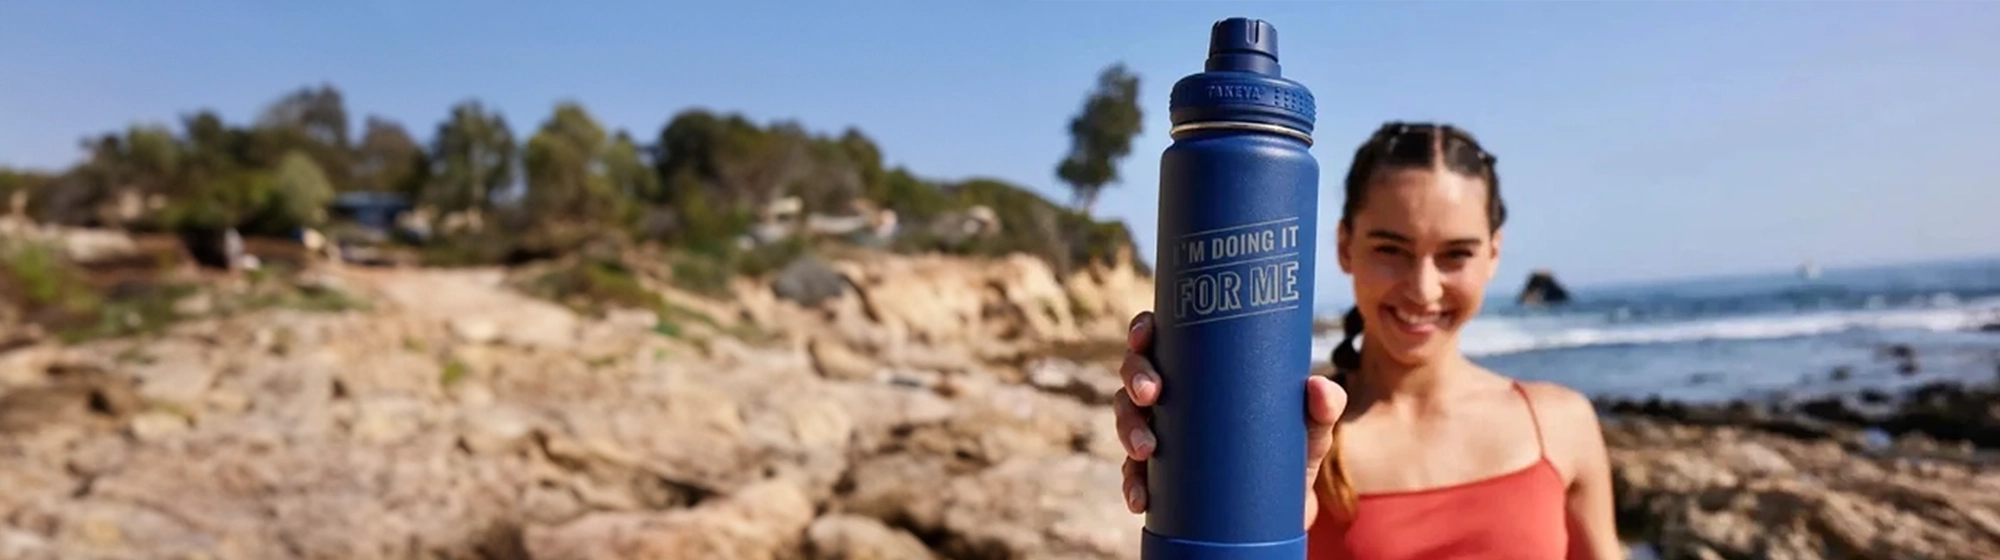 engraved water bottle with the words "I'm doing it for me"